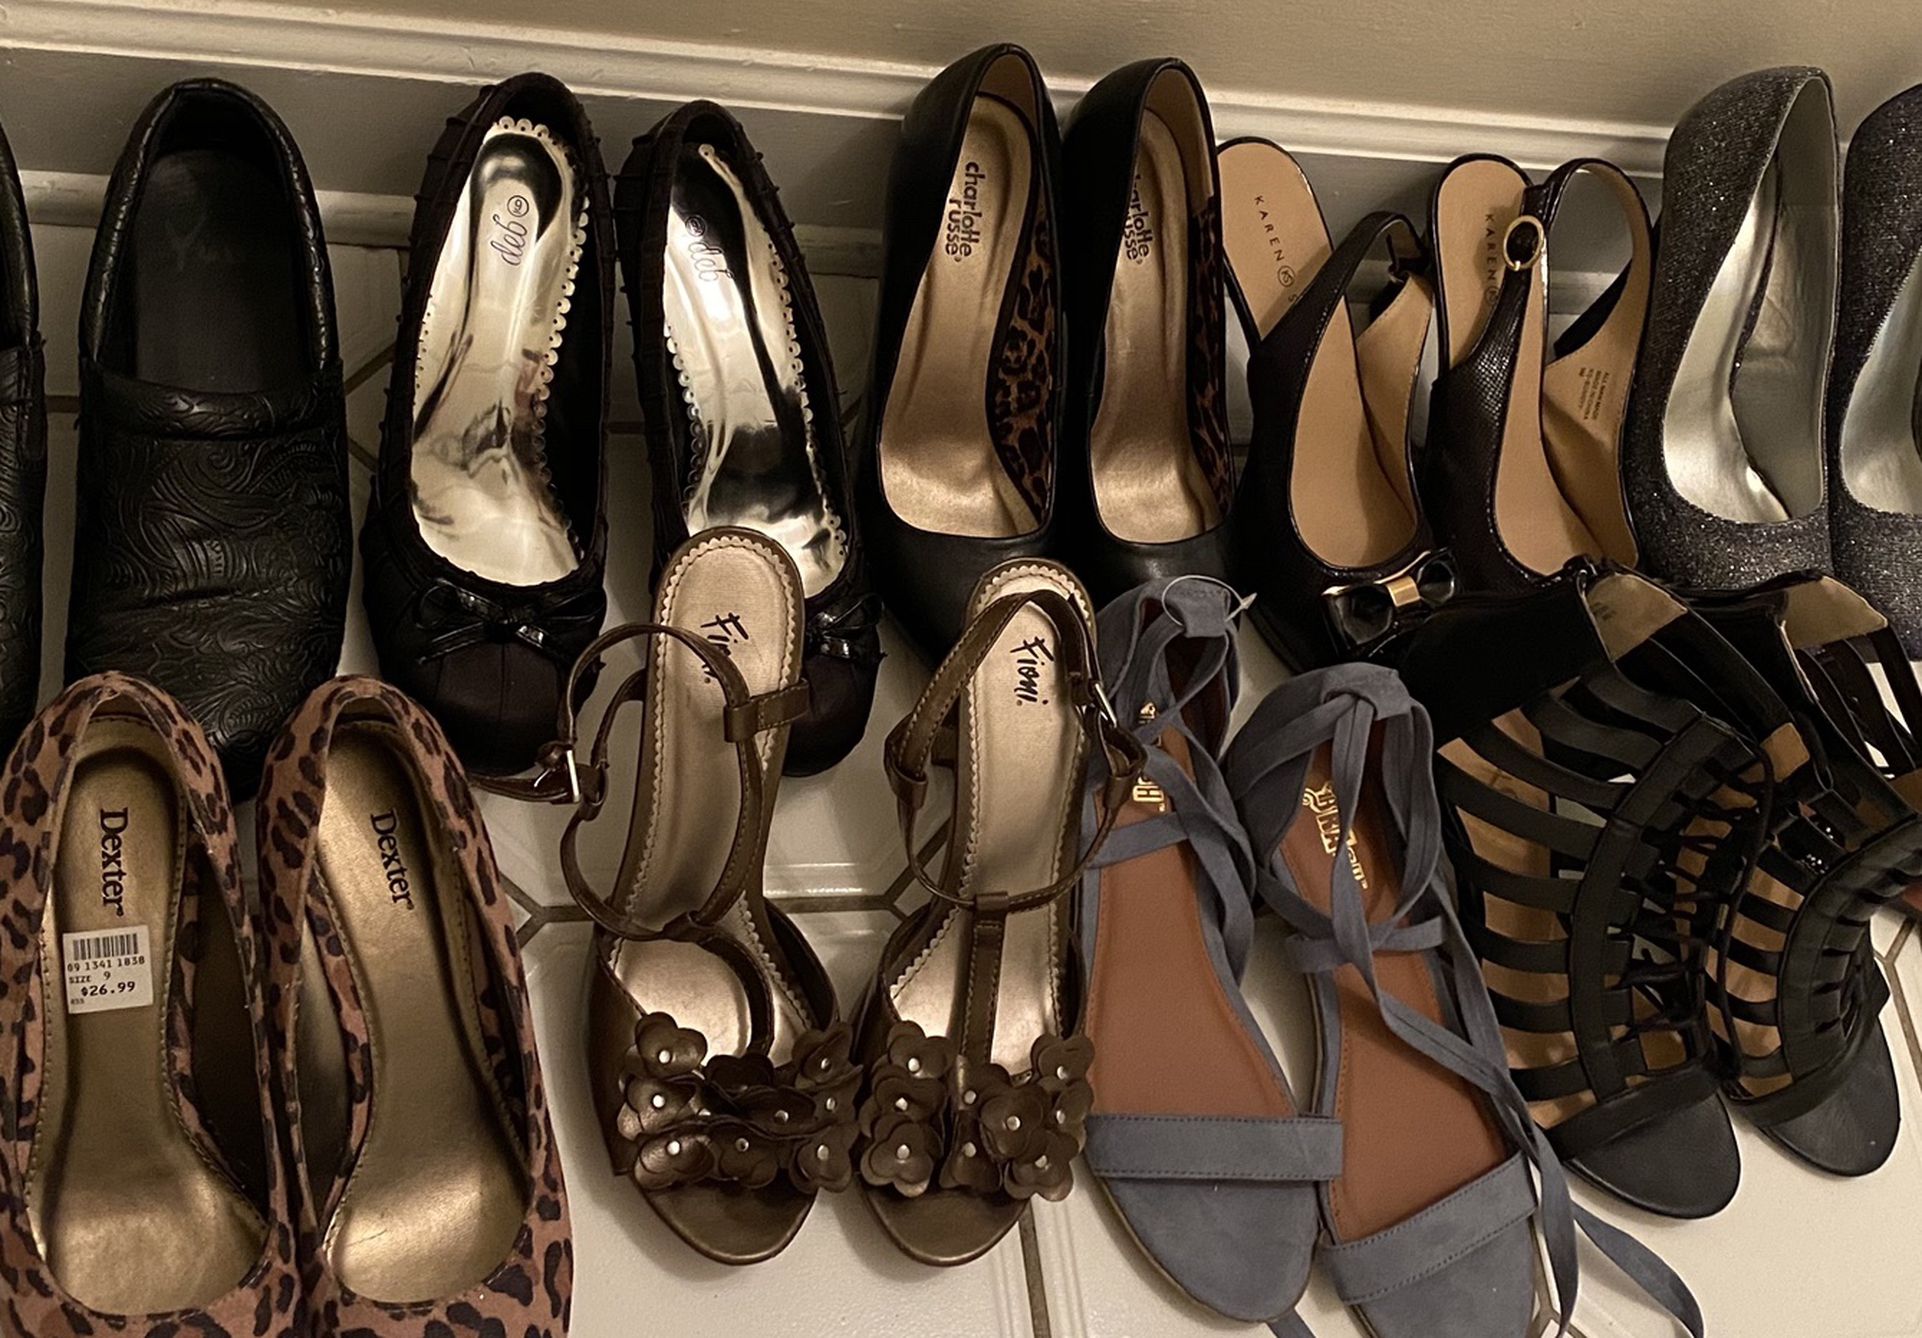 Size 9 Women’s Heels ( All Included For The Price)